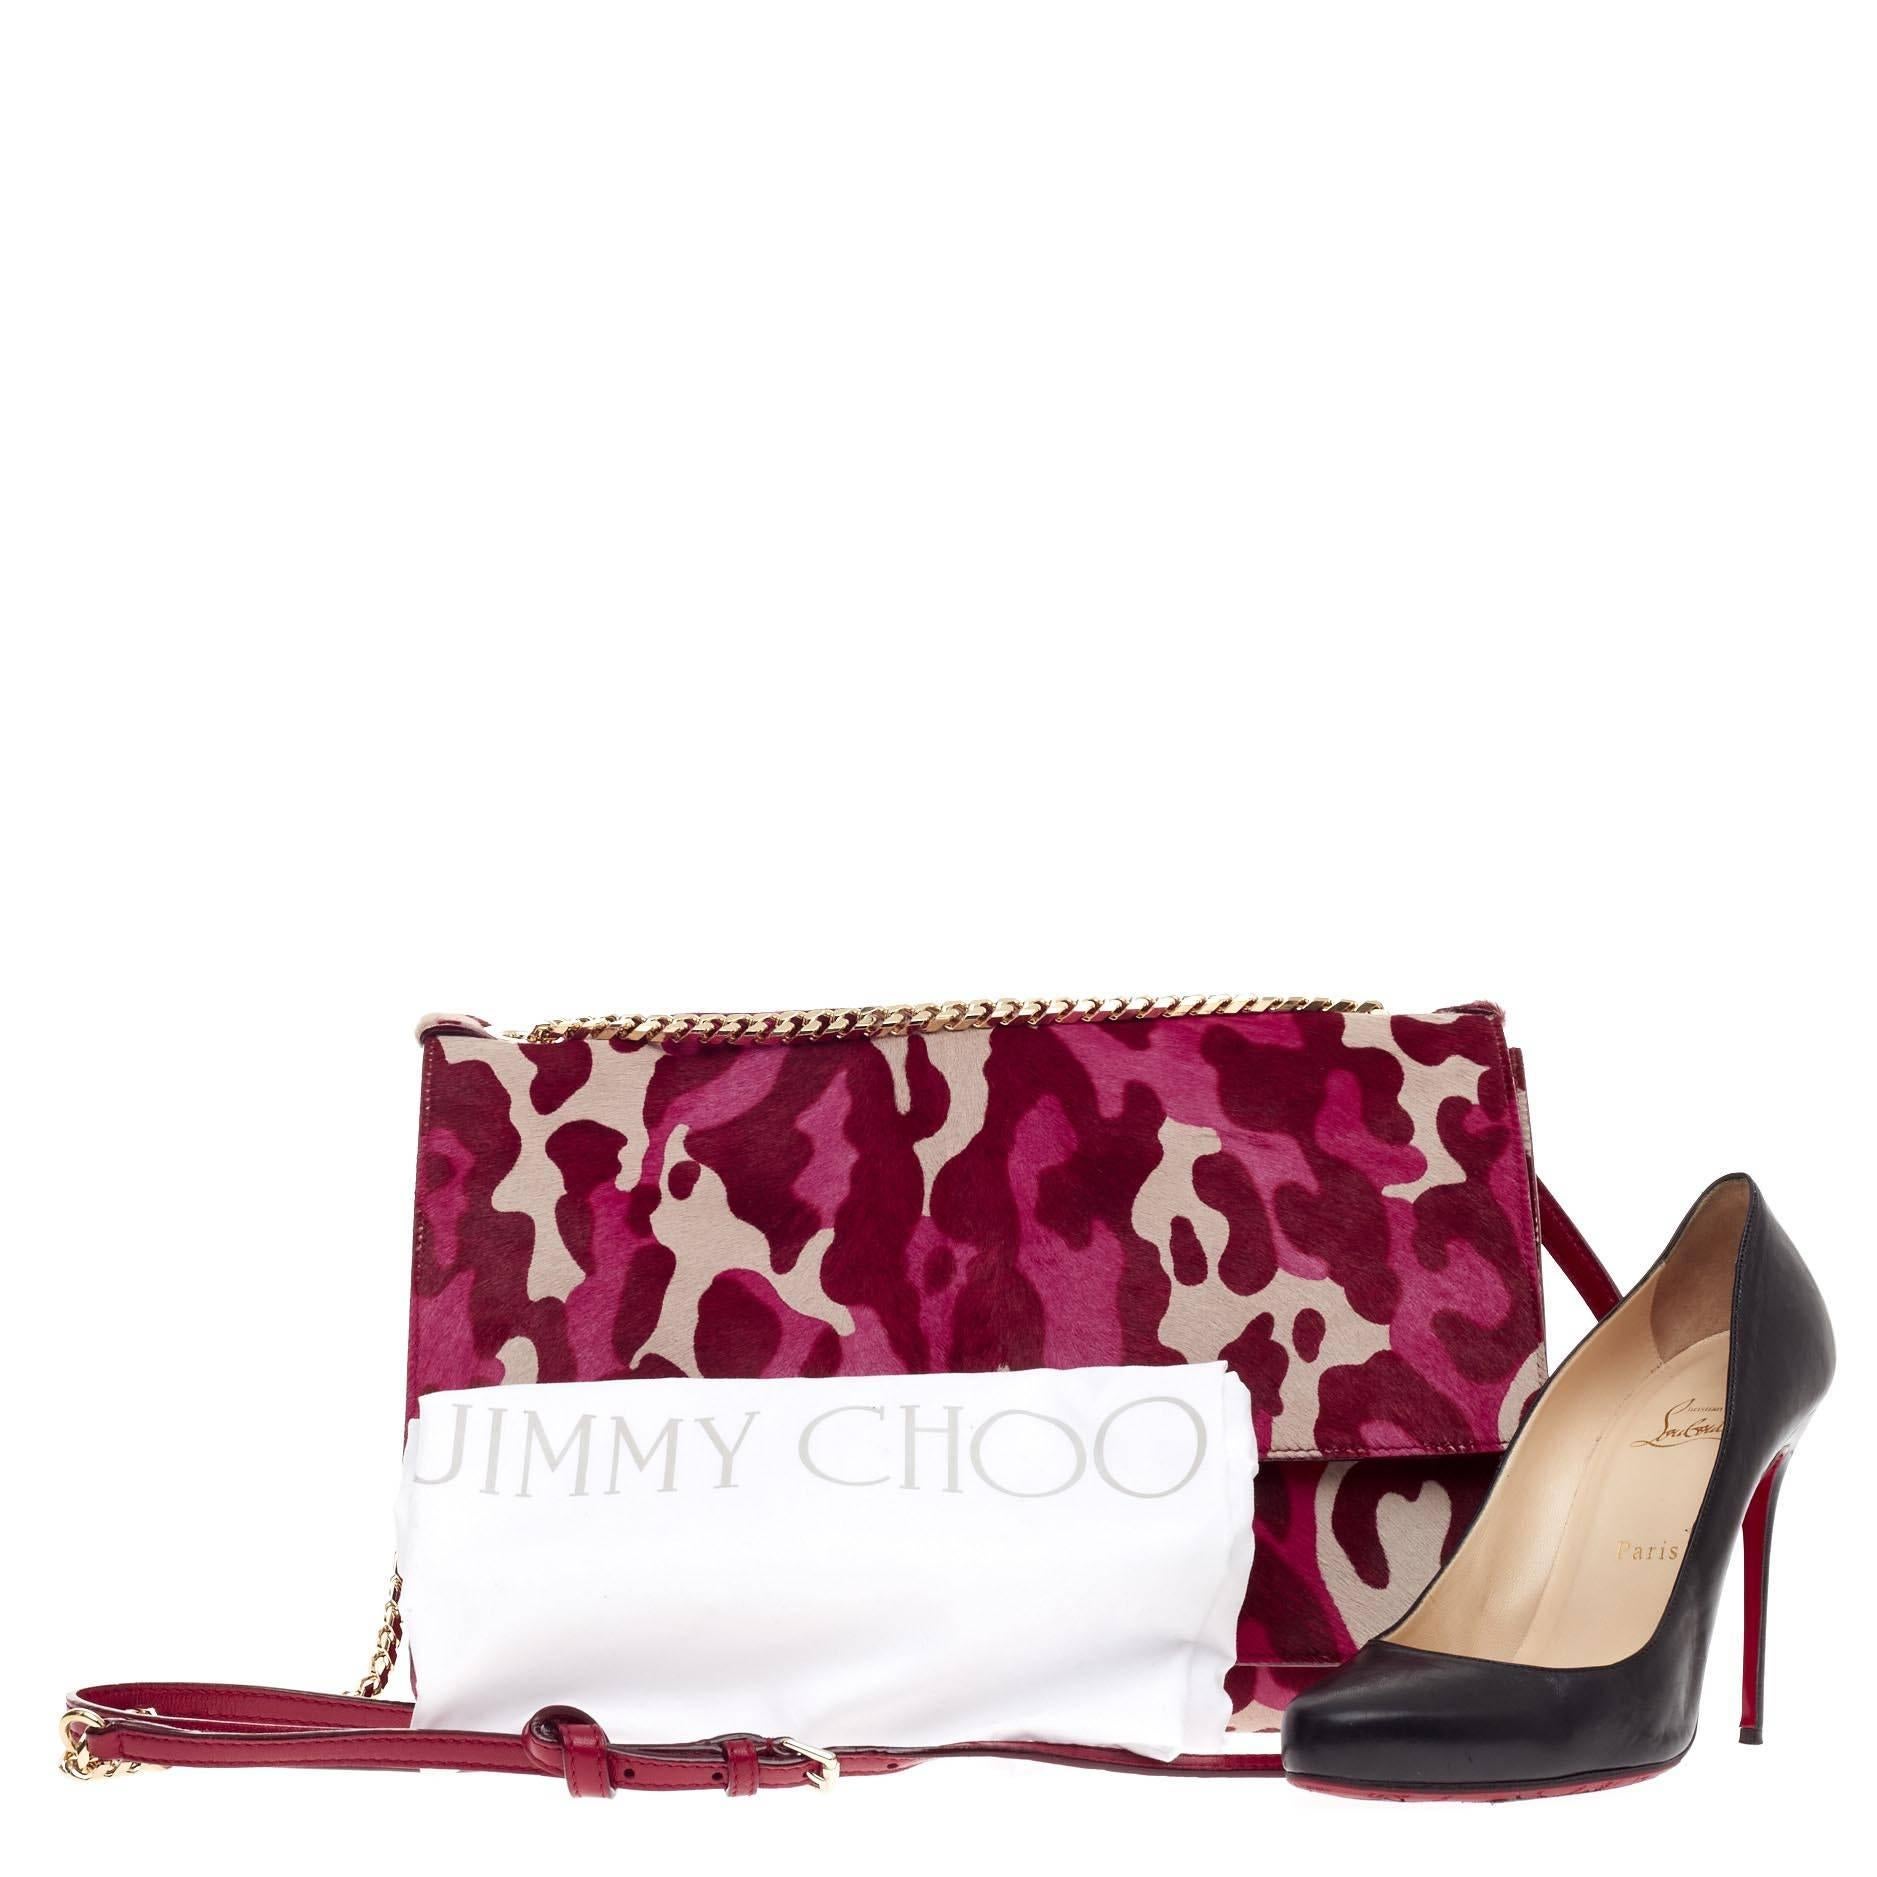 This authentic Jimmy Choo Rebel Soft Shoulder Bag Printed Pony Hair Medium is a luxurious, chic, and eye-catching accessory made for modern fashionistas. Crafted from beautiful pink camouflage printed pony hair, this shoulder bag features a chain